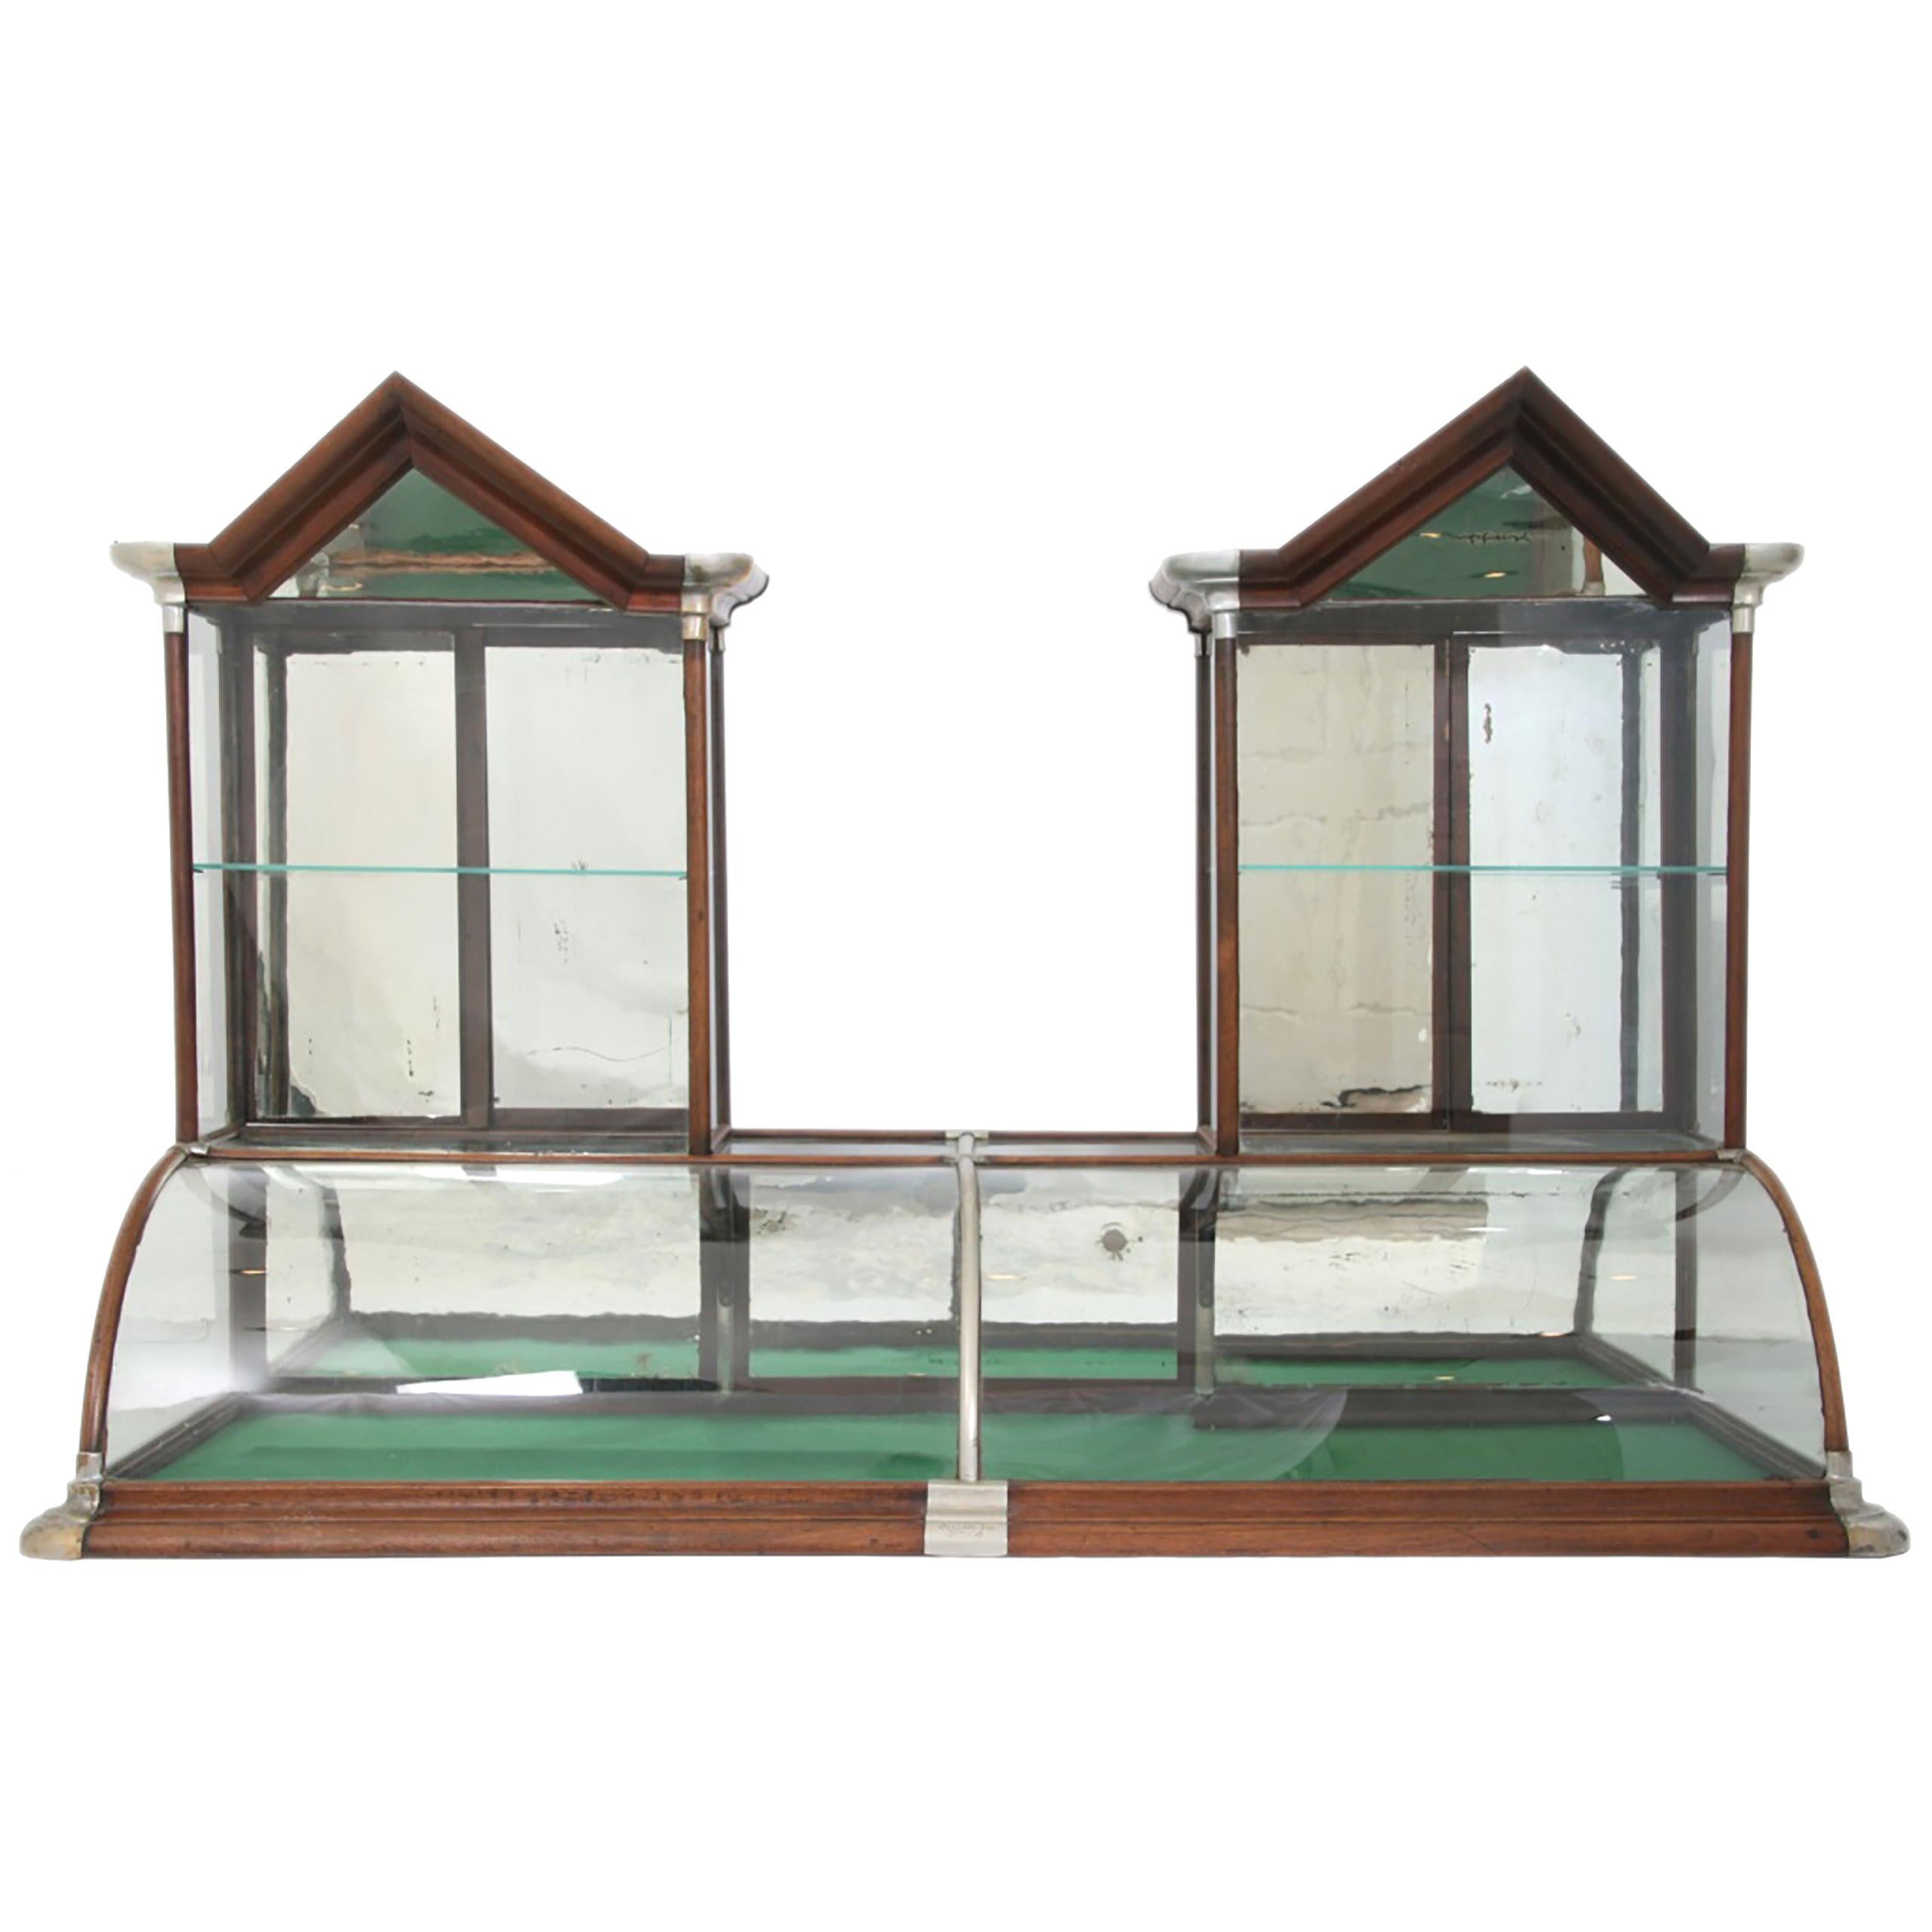 Excelsior Double Tower Steeple Display Case For Sale